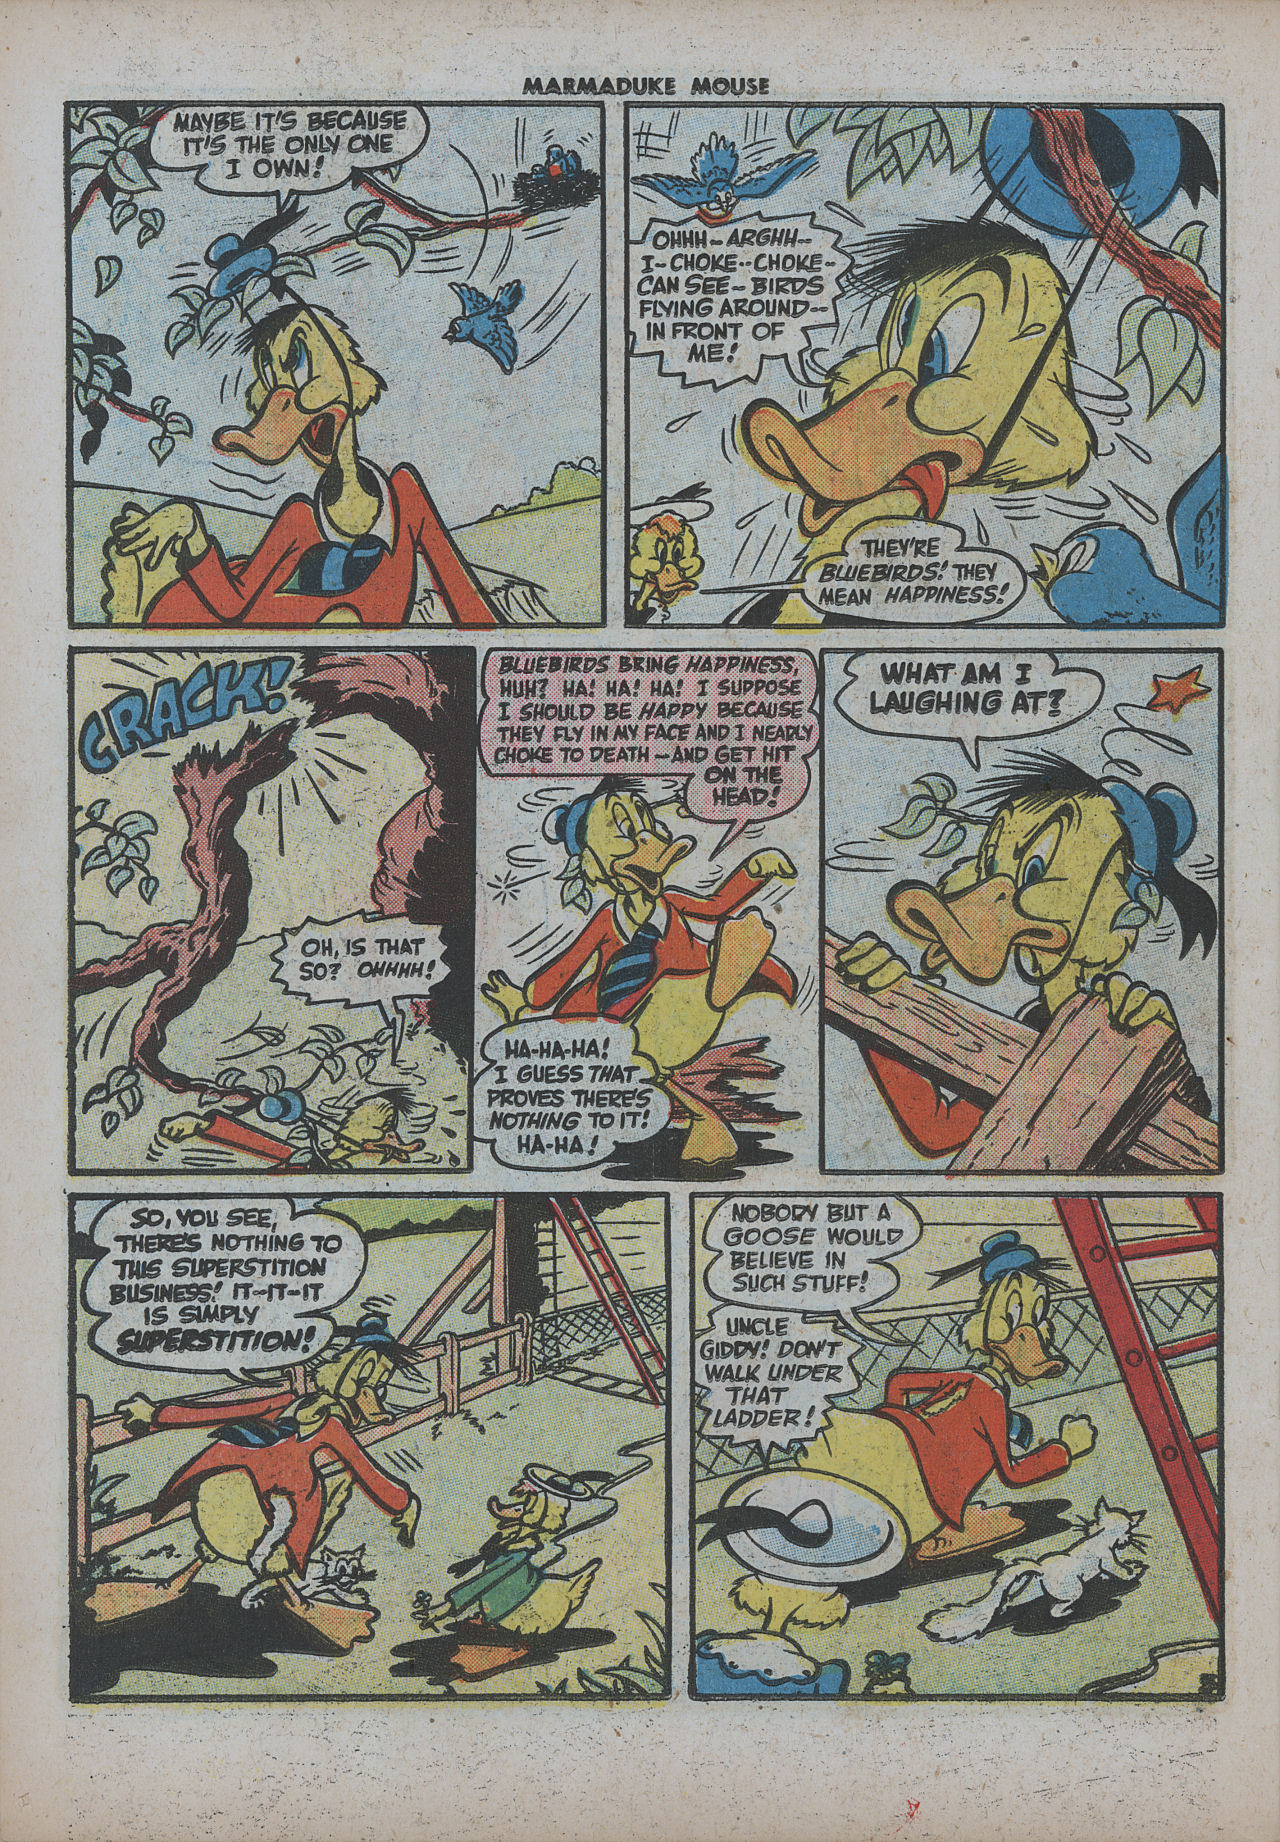 Read online Marmaduke Mouse comic -  Issue #3 - 34